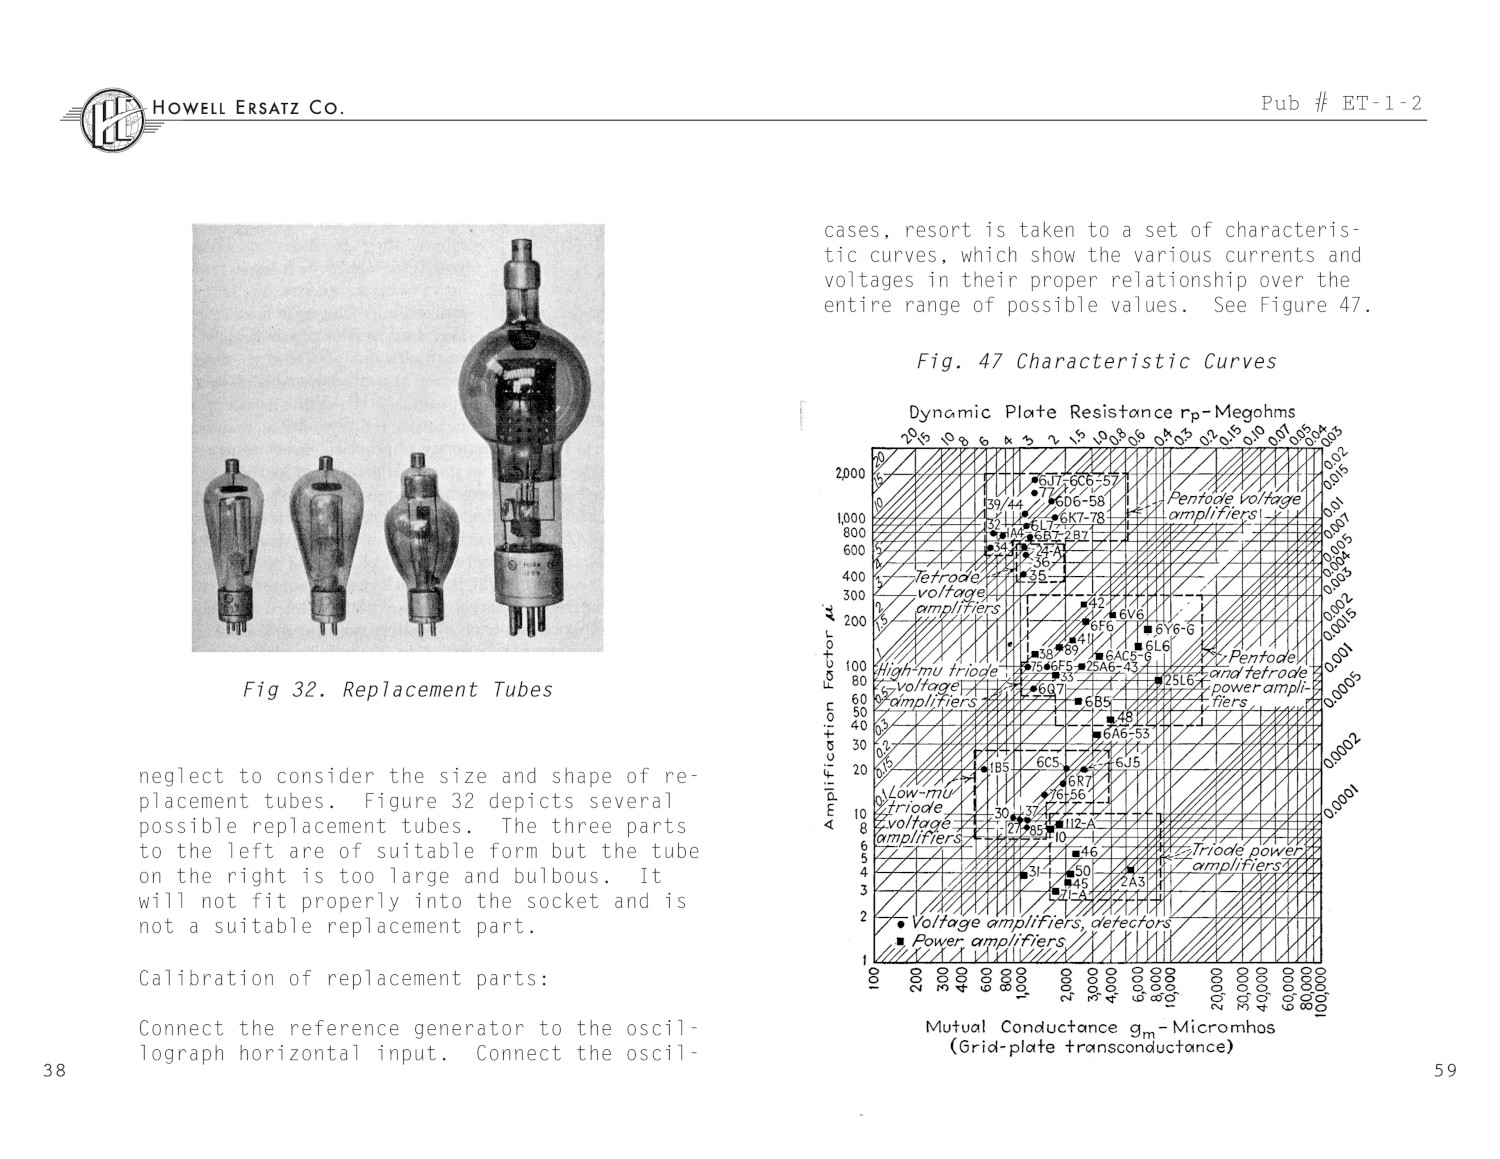 Section of the ET-1 Manual